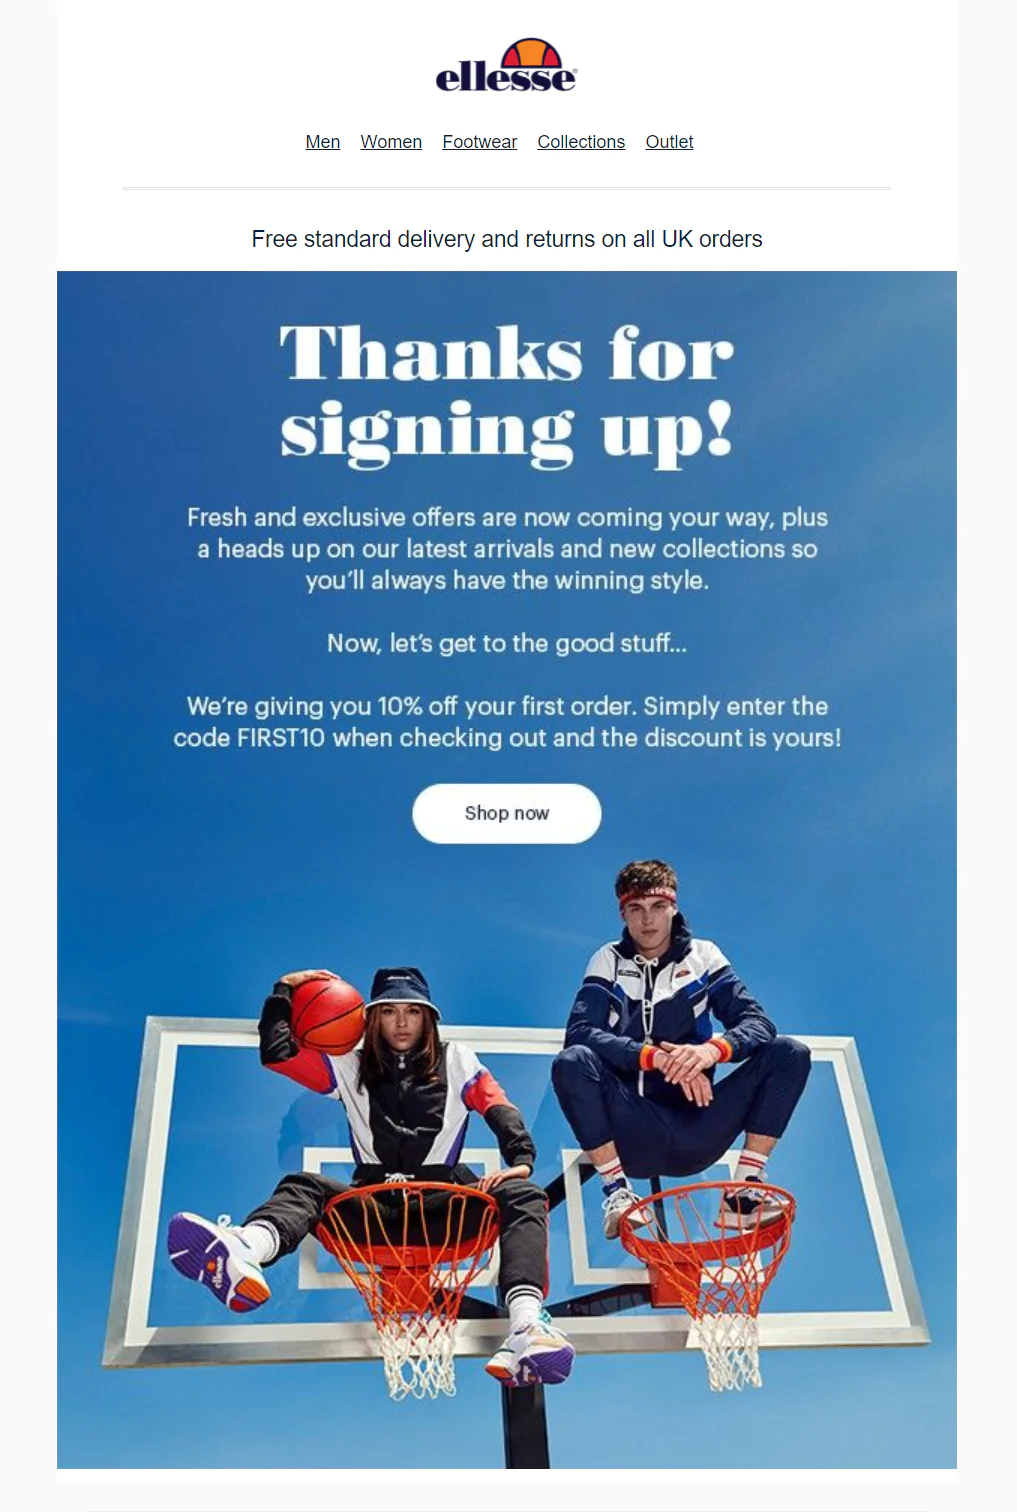 Ellesse email campaign